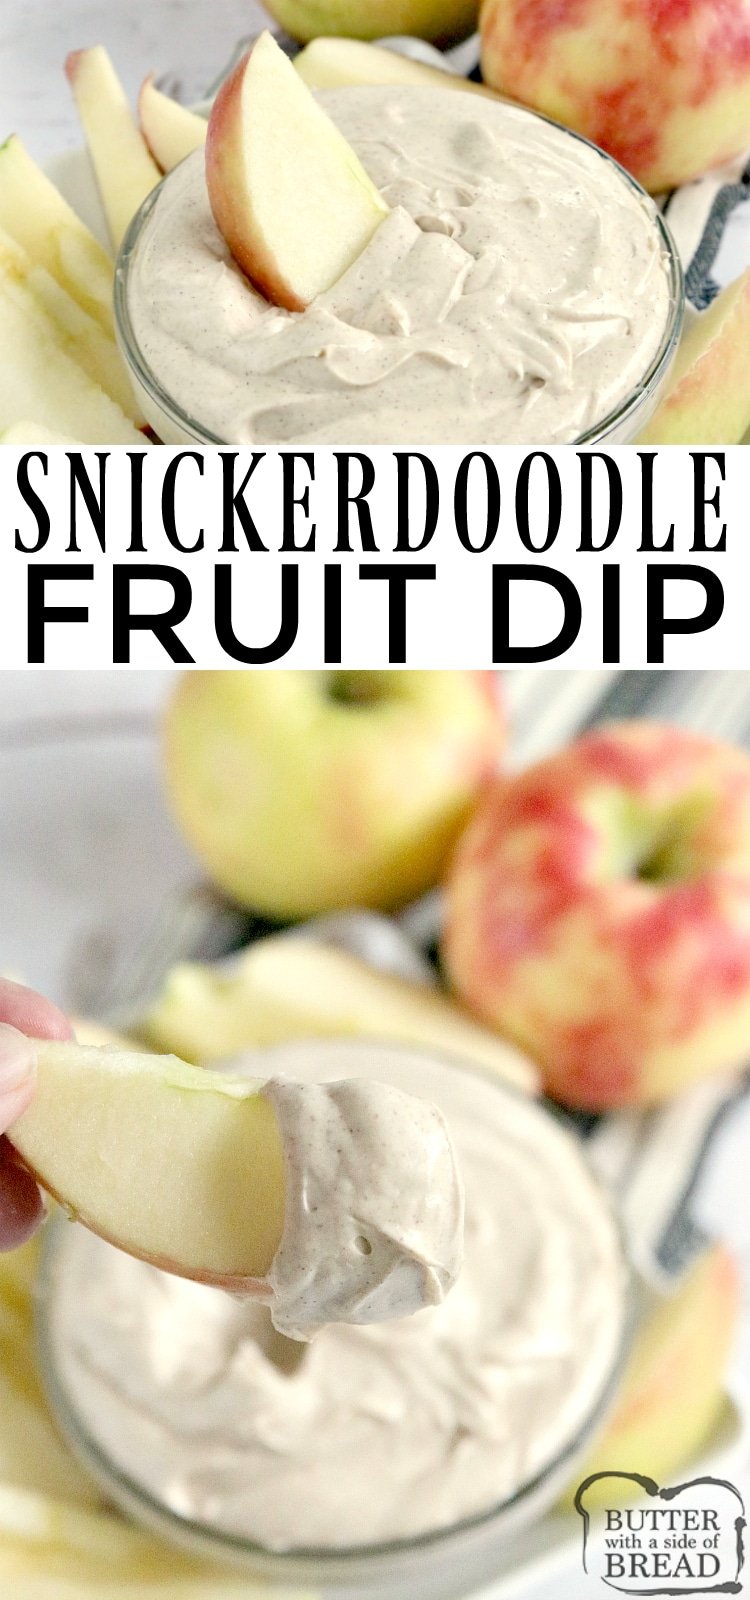 Snickerdoodle Fruit Dip is creamy, delicious and full of the cinnamon flavor that is found in snickerdoodle cookies! This cream cheese fruit dip is super easy to make and is ready to serve within minutes!